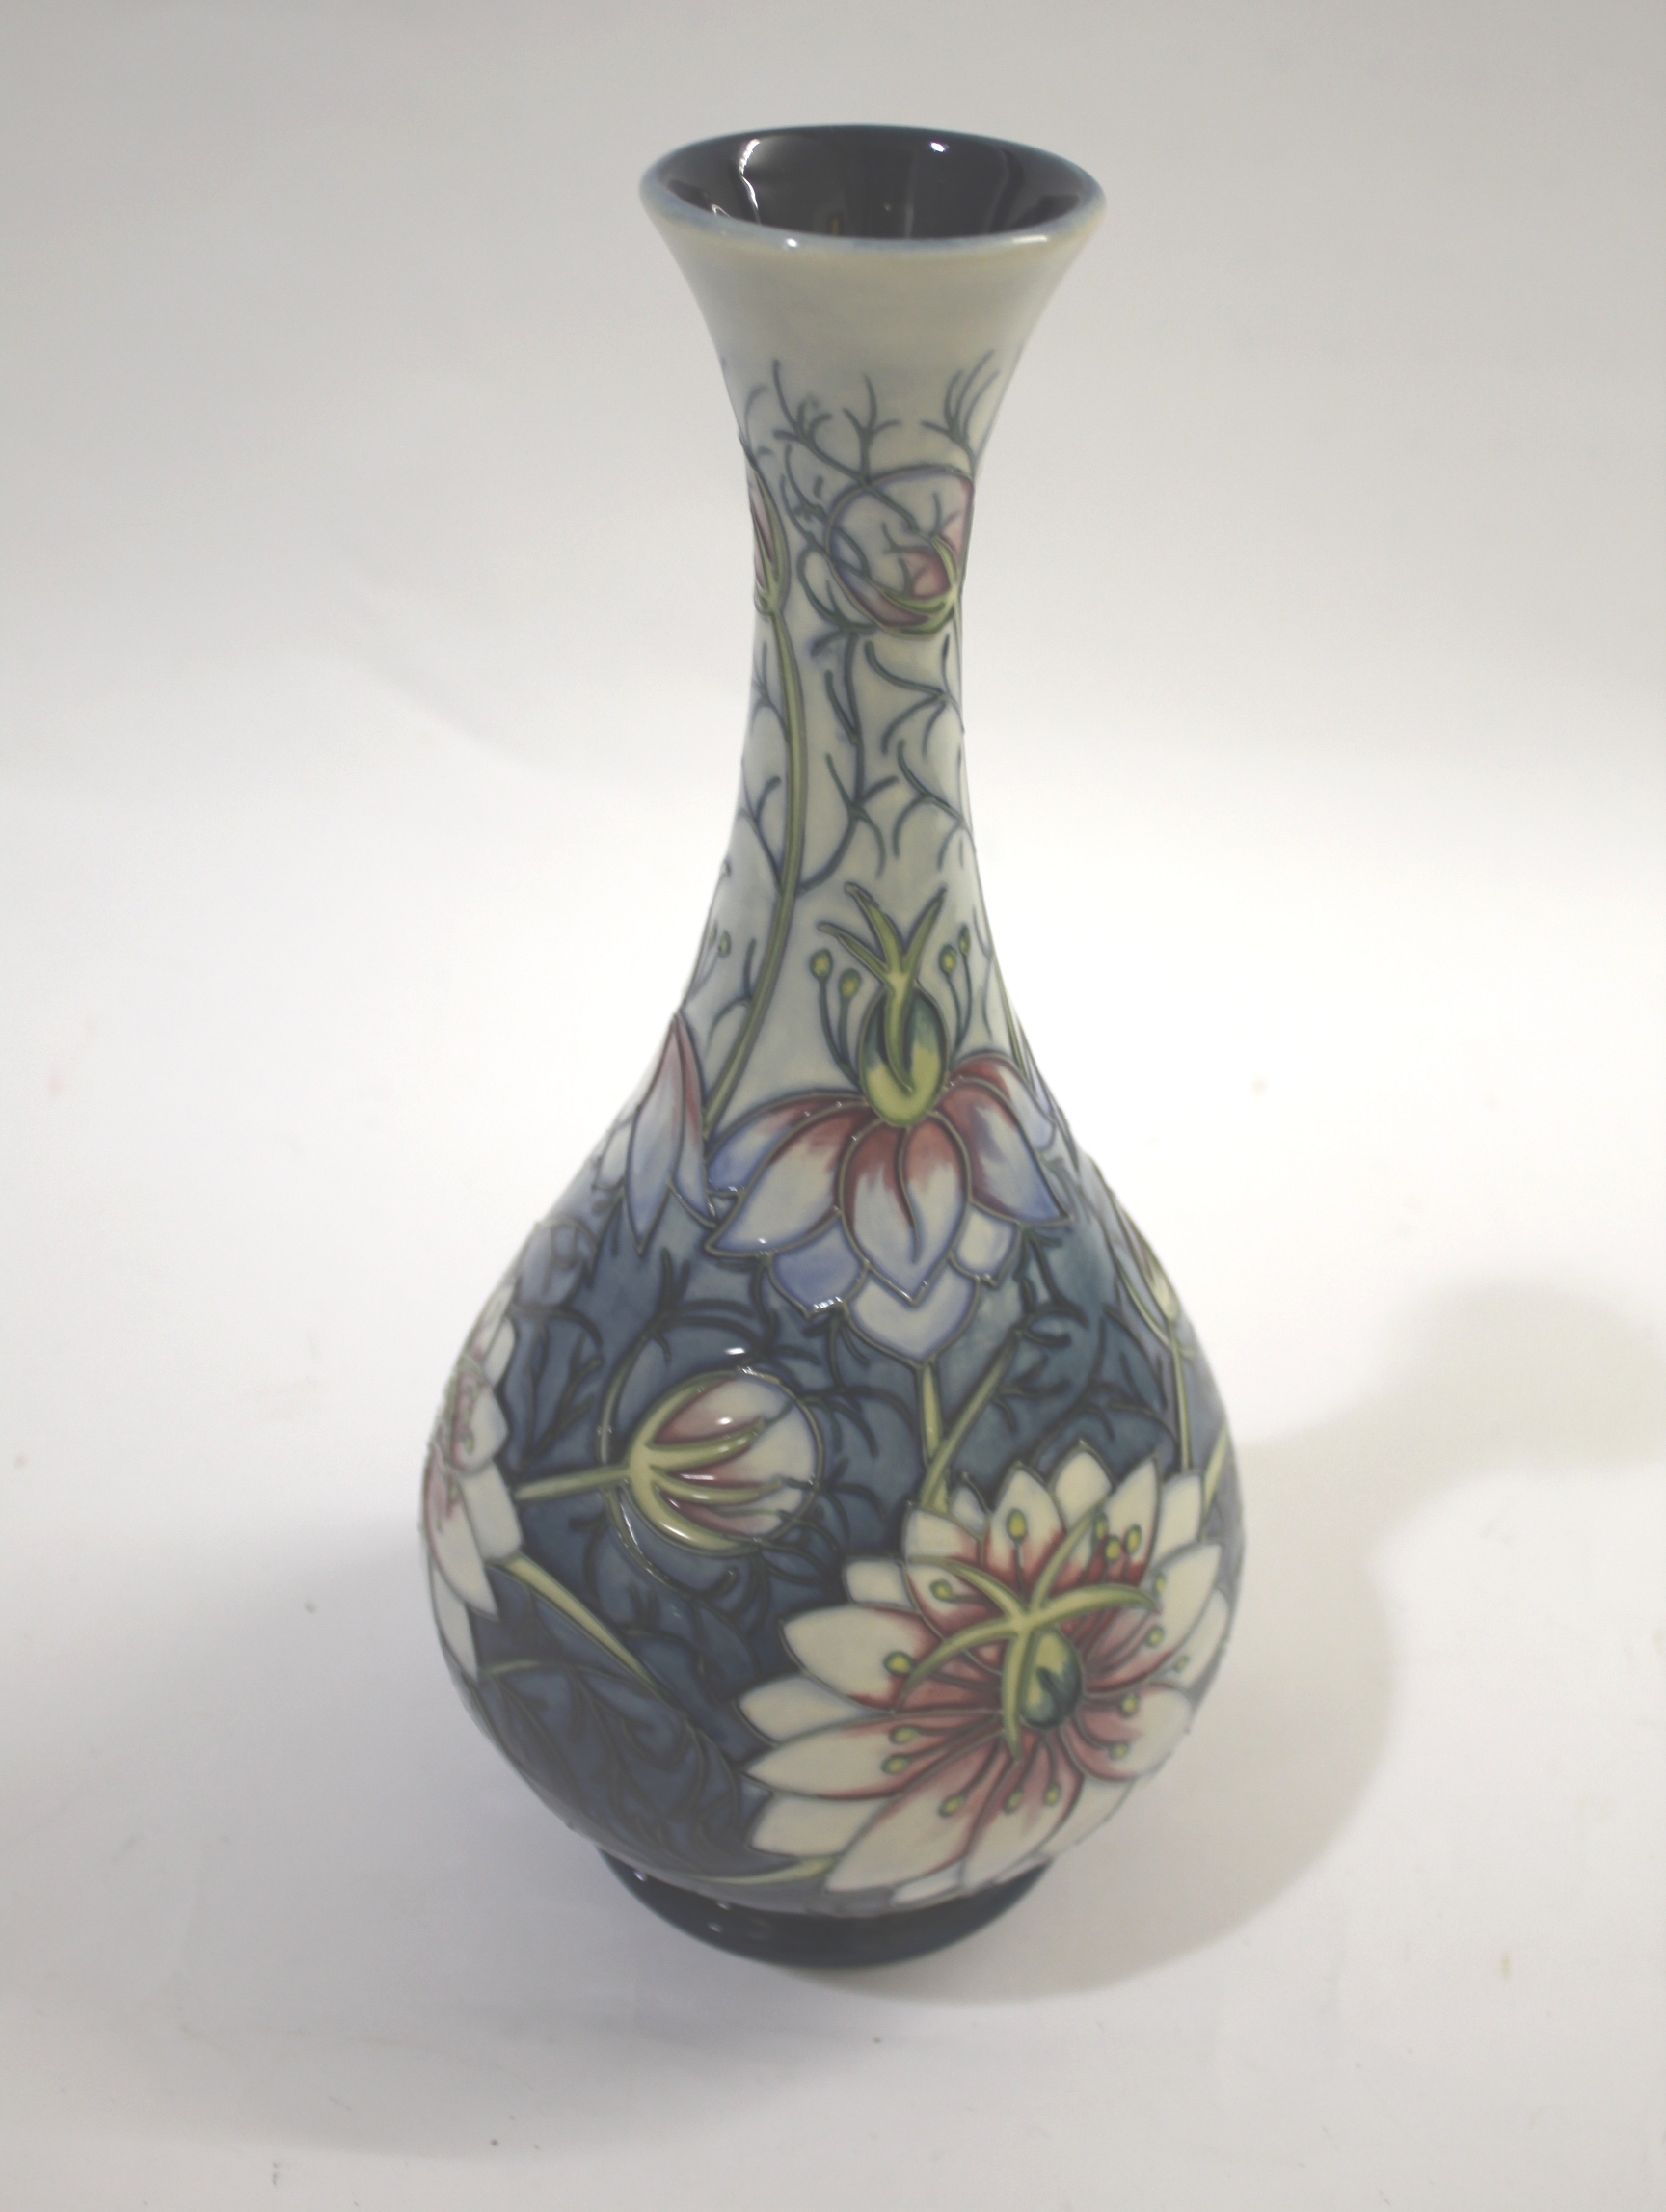 MOORCROFT VASE - LOVE IN A MIST a boxed modern Moorcroft limited edition vase in the Love in a - Image 4 of 5